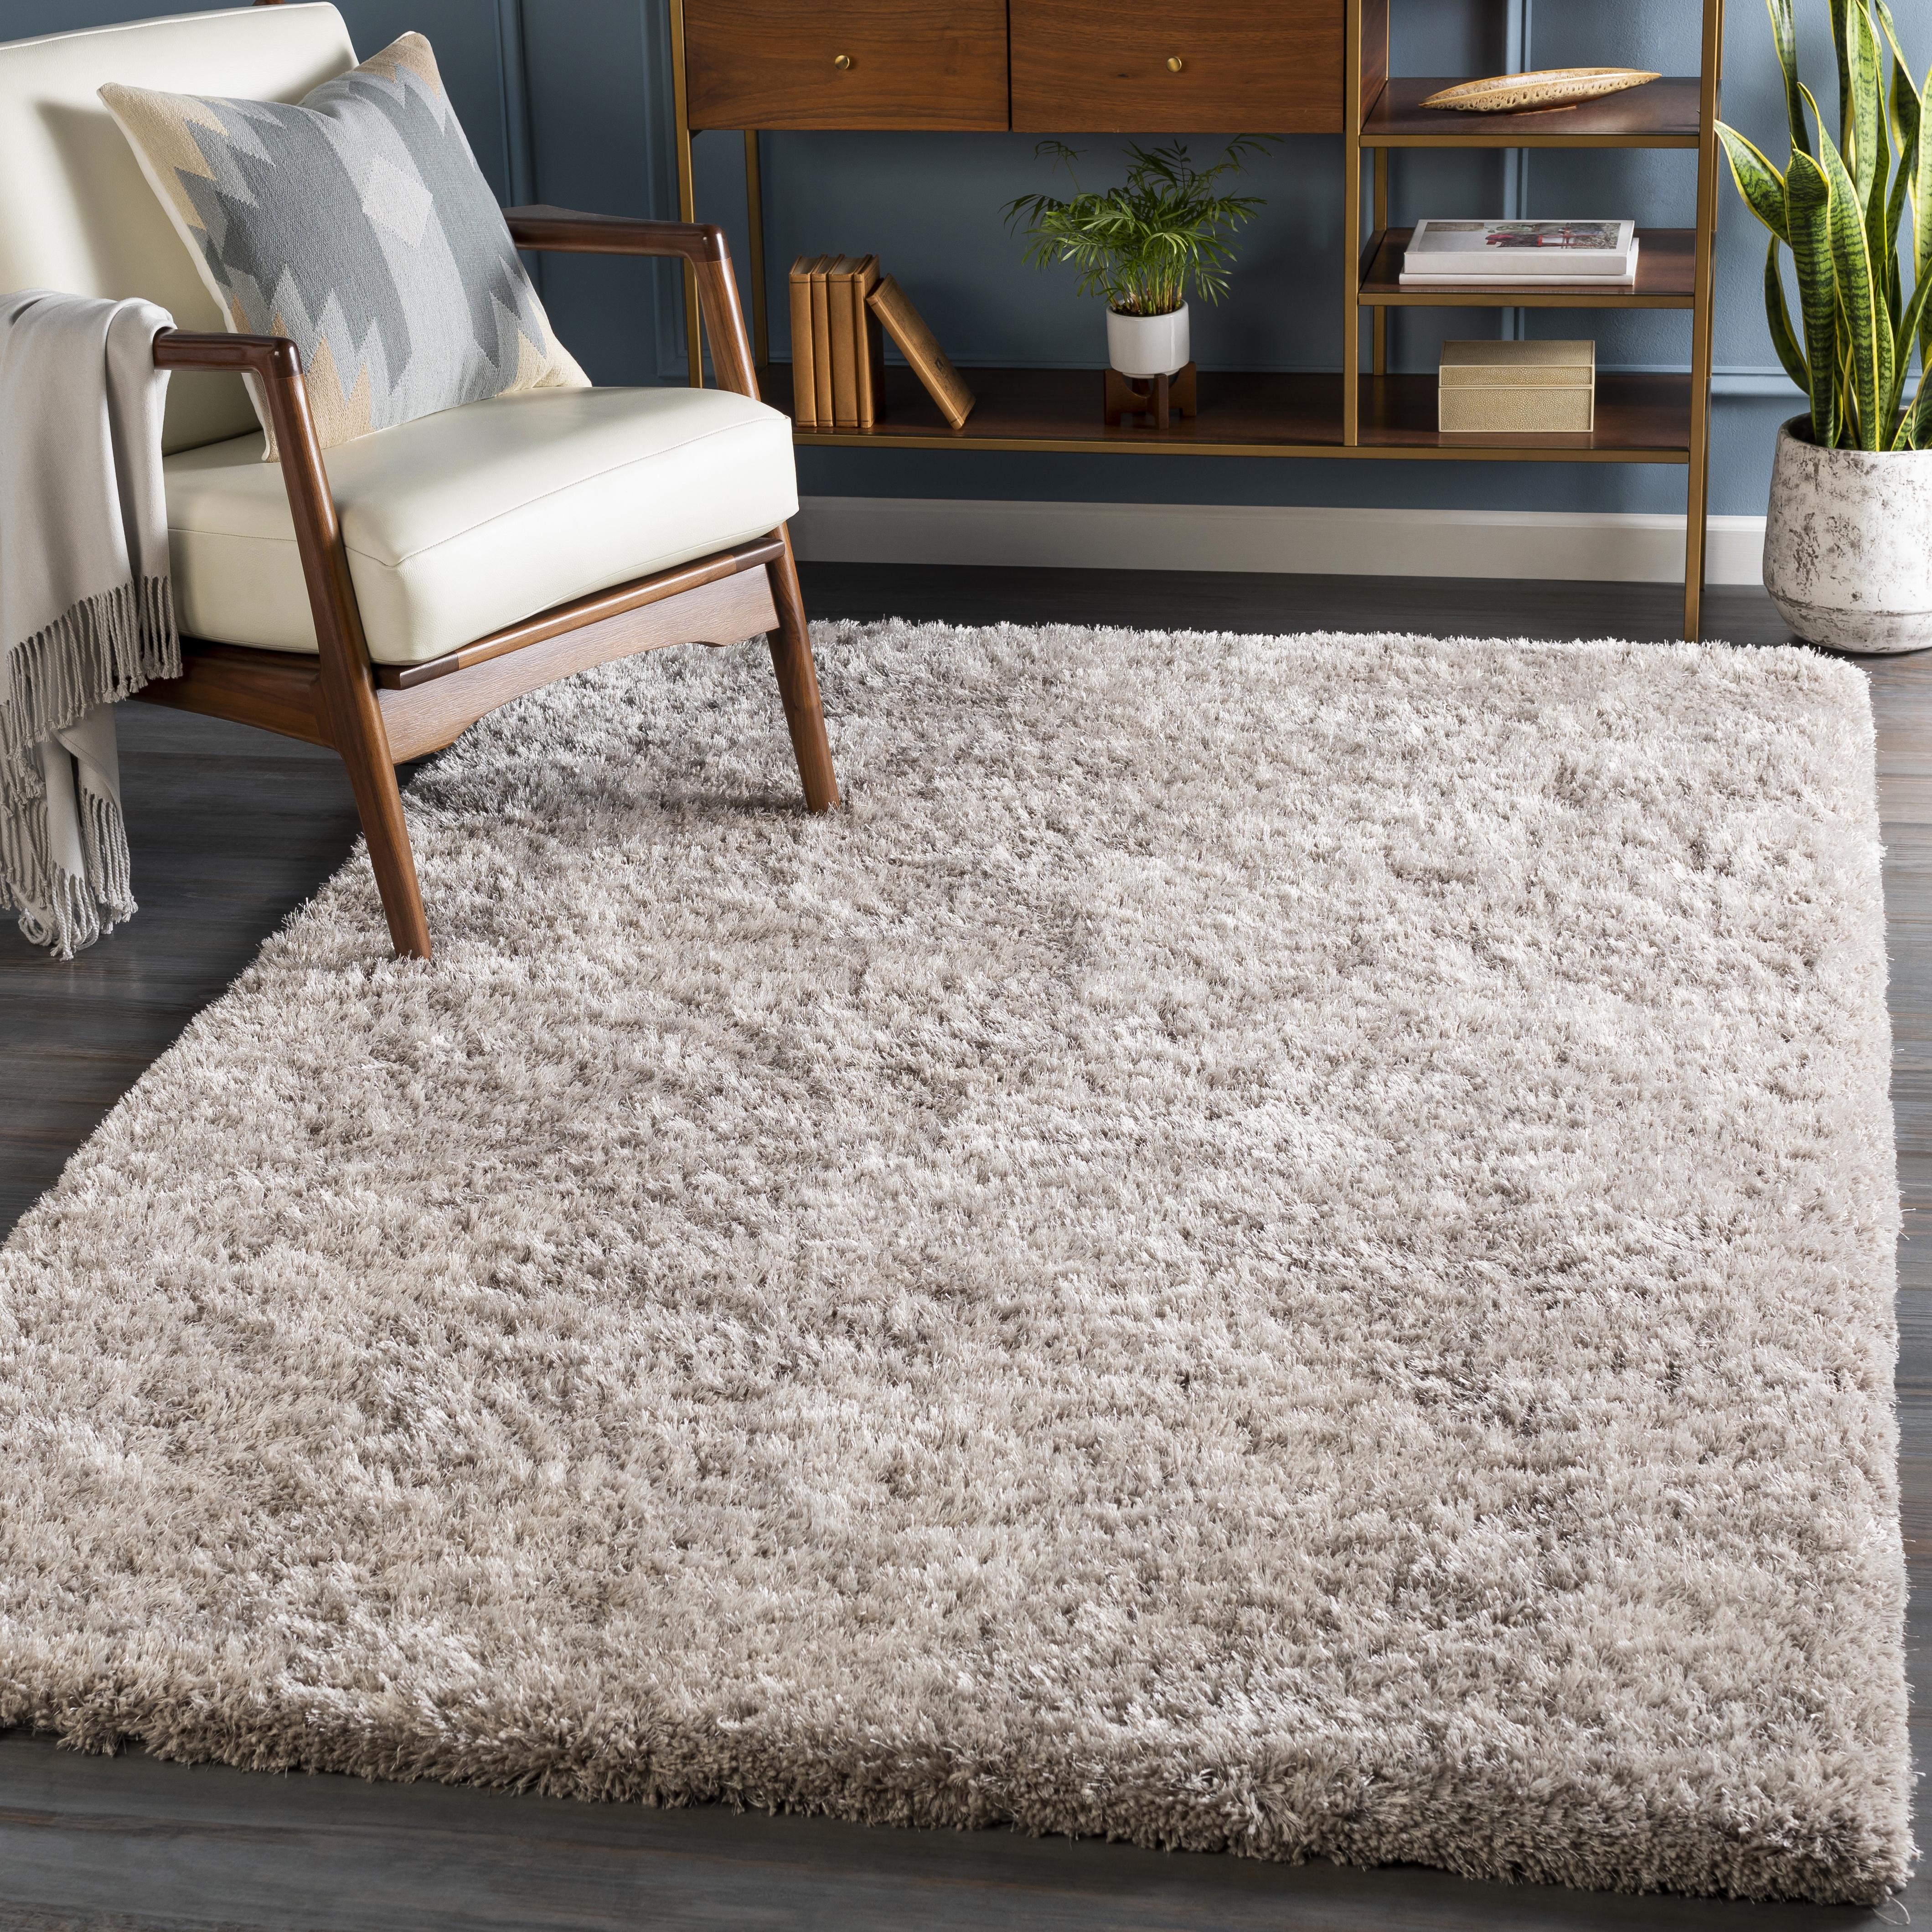 Grizzly Rug, 9' x 12' - Image 1